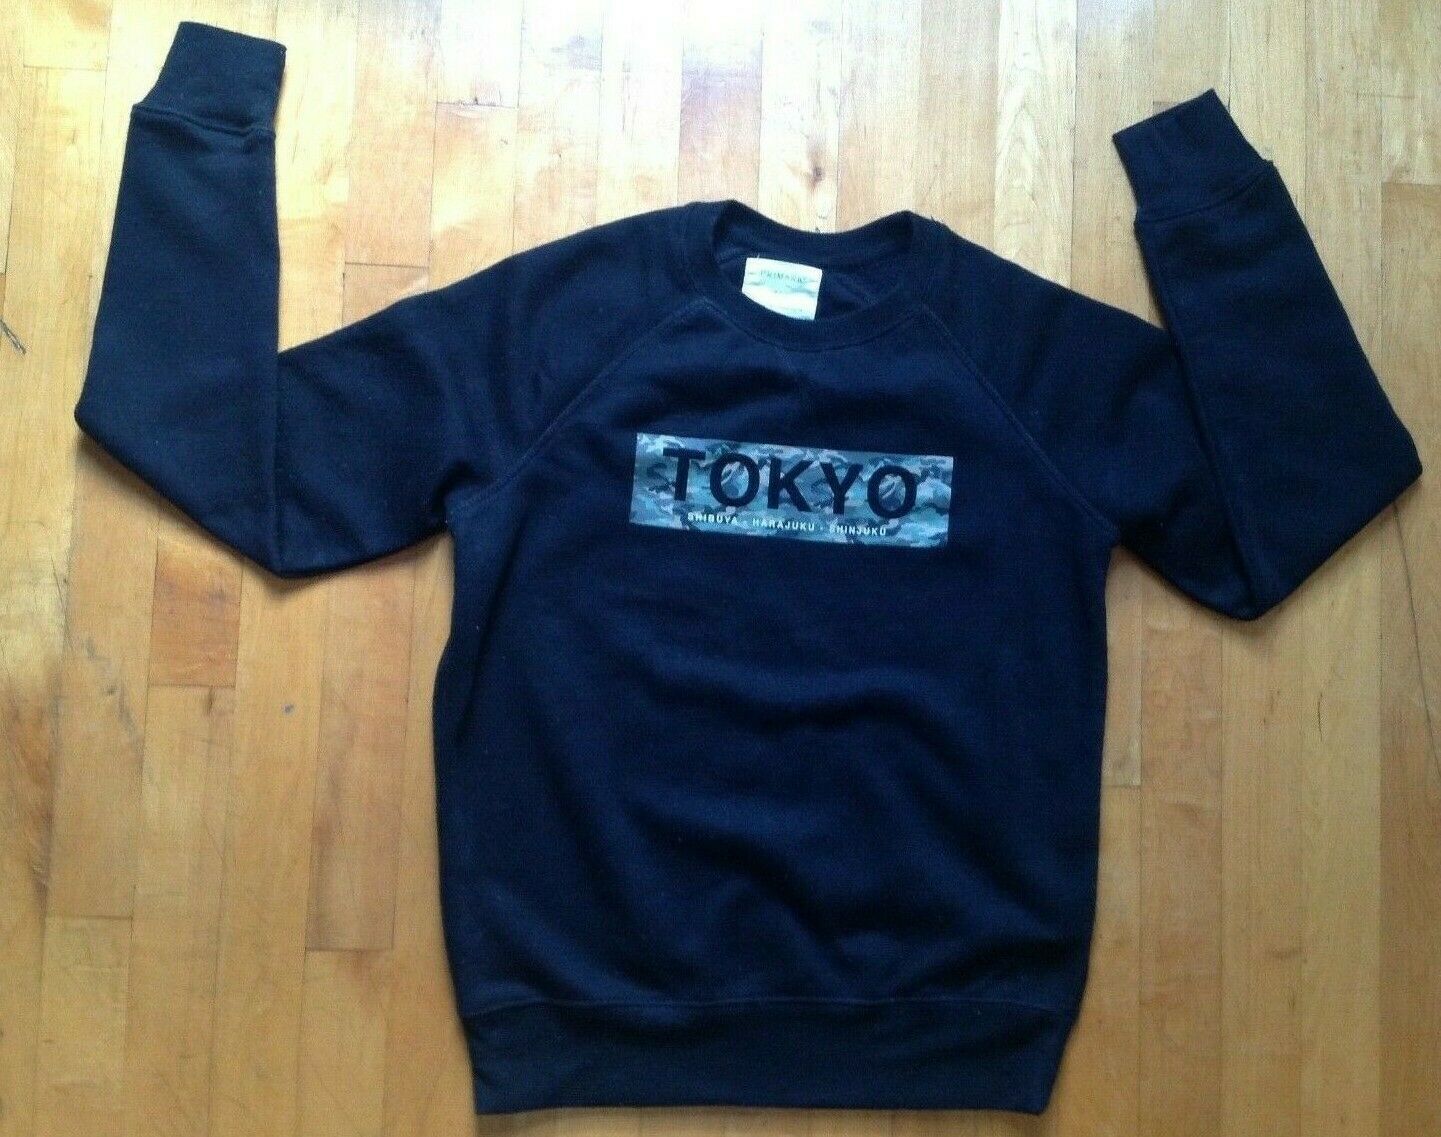 Primary image for PRIMARK Tokyo Black Camouflage  Long Sleeve Sweatshirt Size Small 